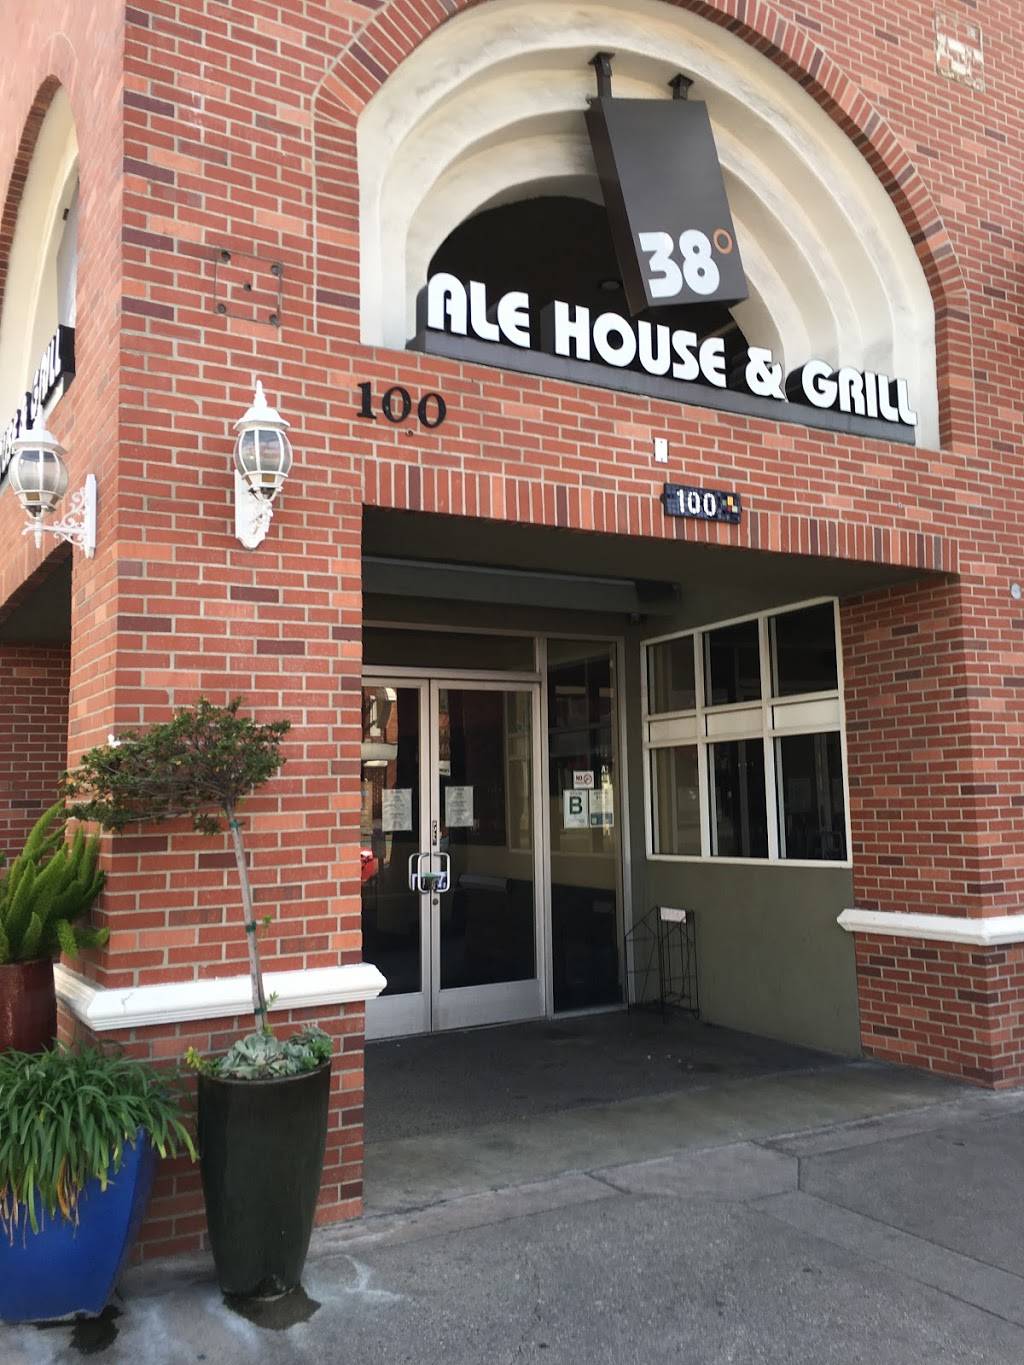 38 Degrees Ale House & Grill | restaurant | 100 W Main St, Alhambra, CA 91801, USA | 6262822038 OR +1 626-282-2038